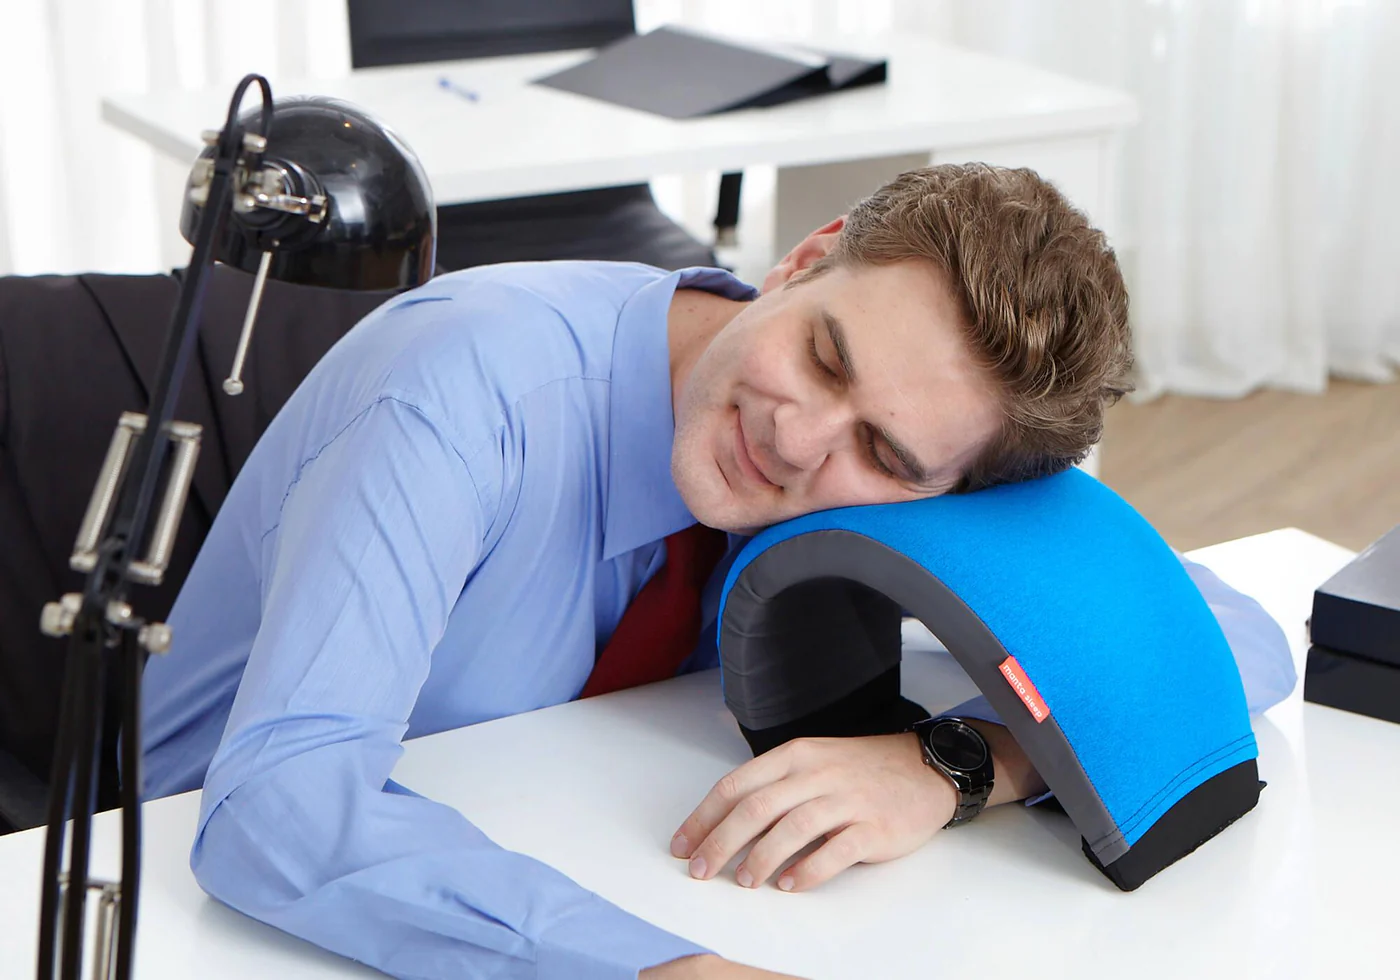 A man using the best sleeping pillow for the office with an arc design.